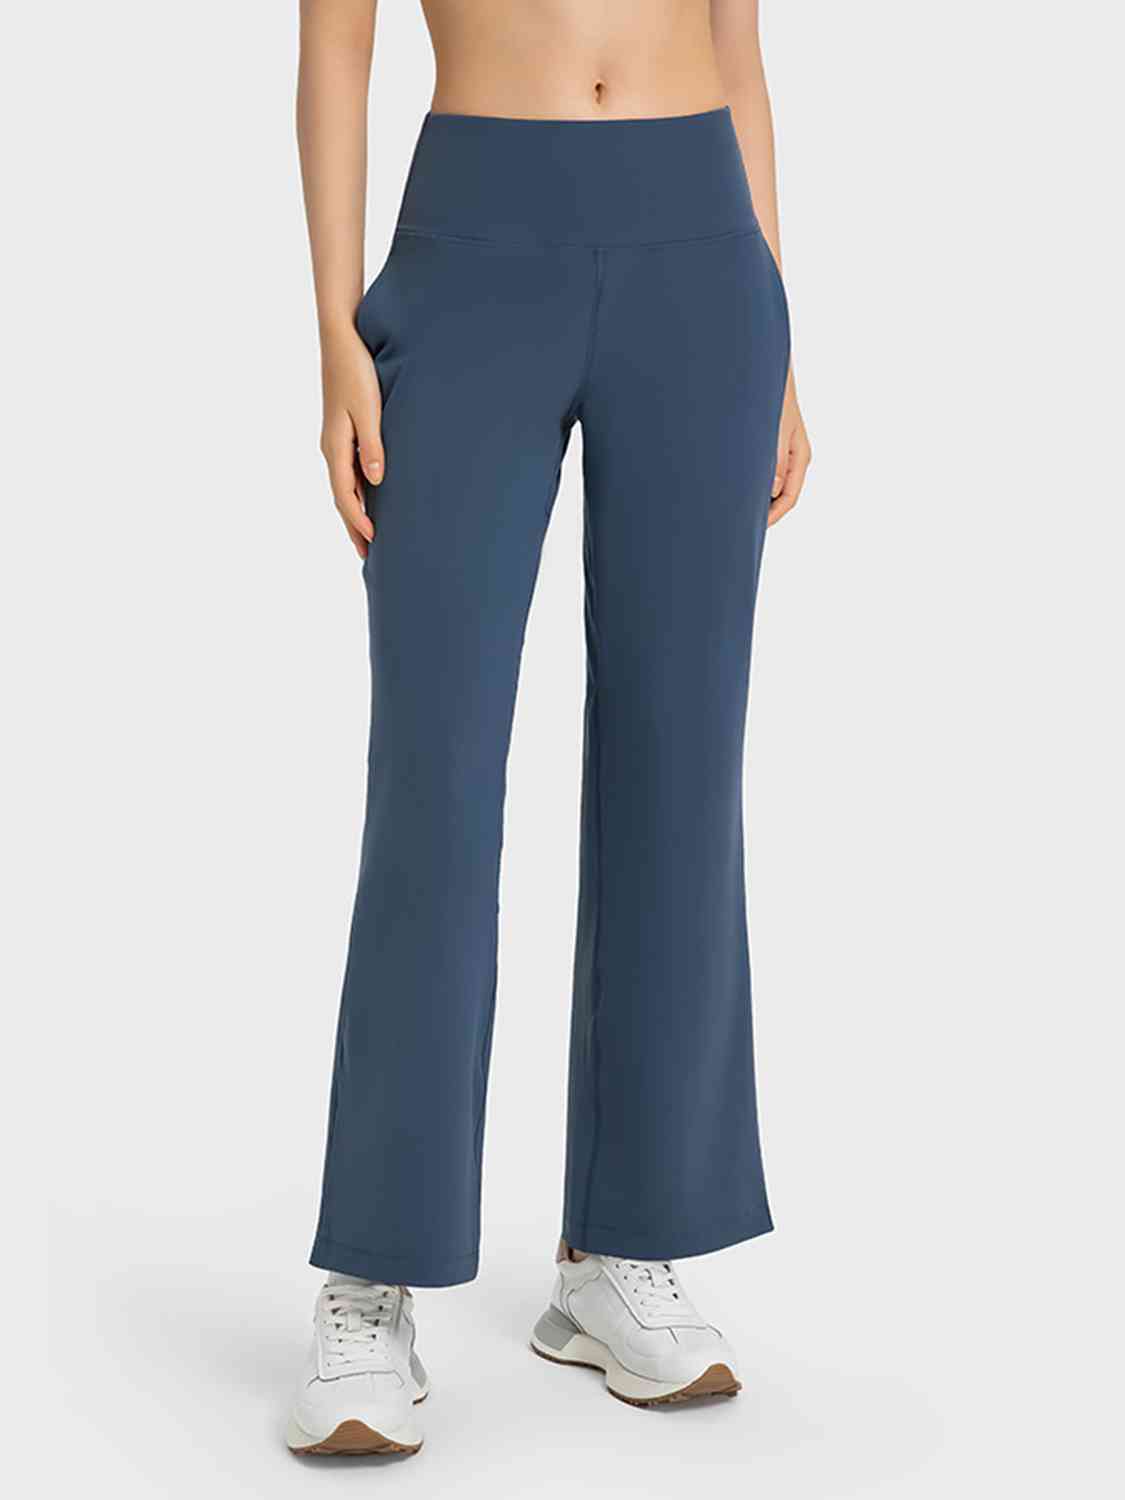 Wide Leg Slit Pants with Pockets – Bad Peach Fitness